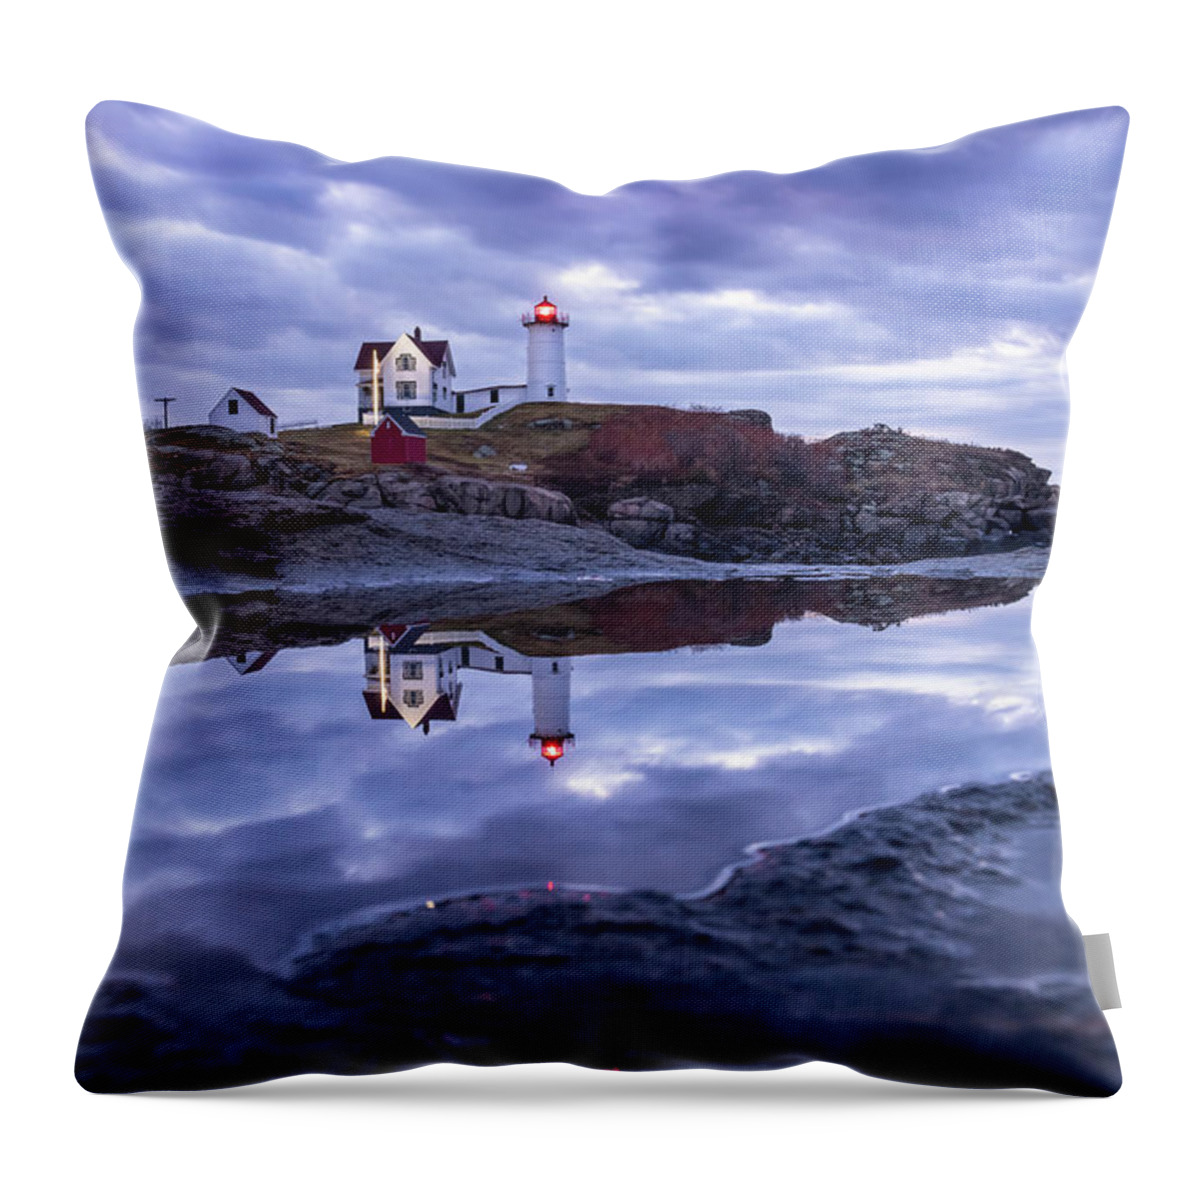 Nubble Throw Pillow featuring the photograph Morning Reflections by John Cannon